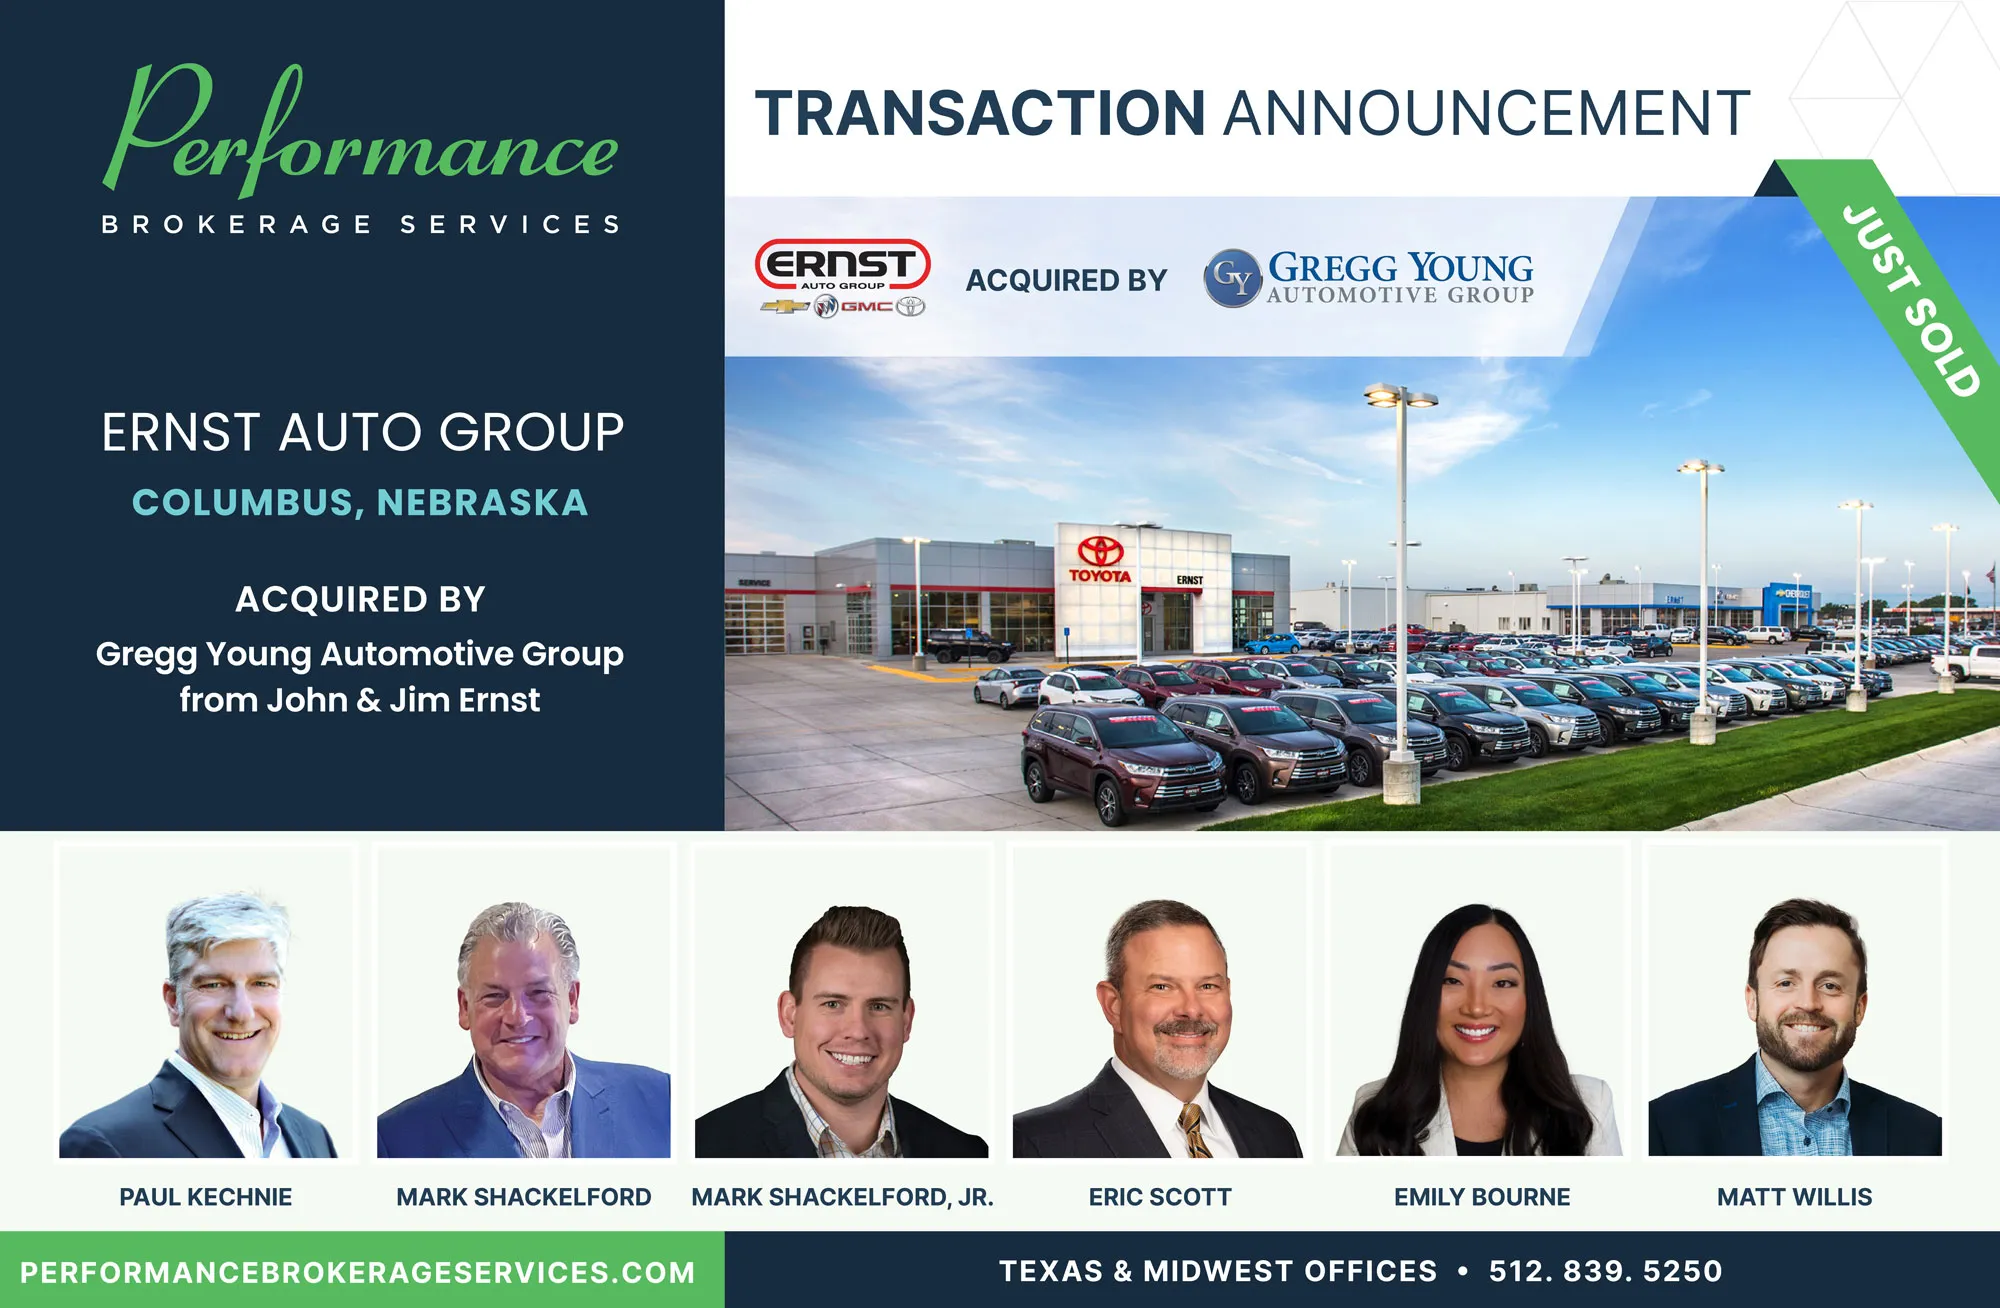 Ernst Auto Group sells to gregg young automotive group with performance brokerage